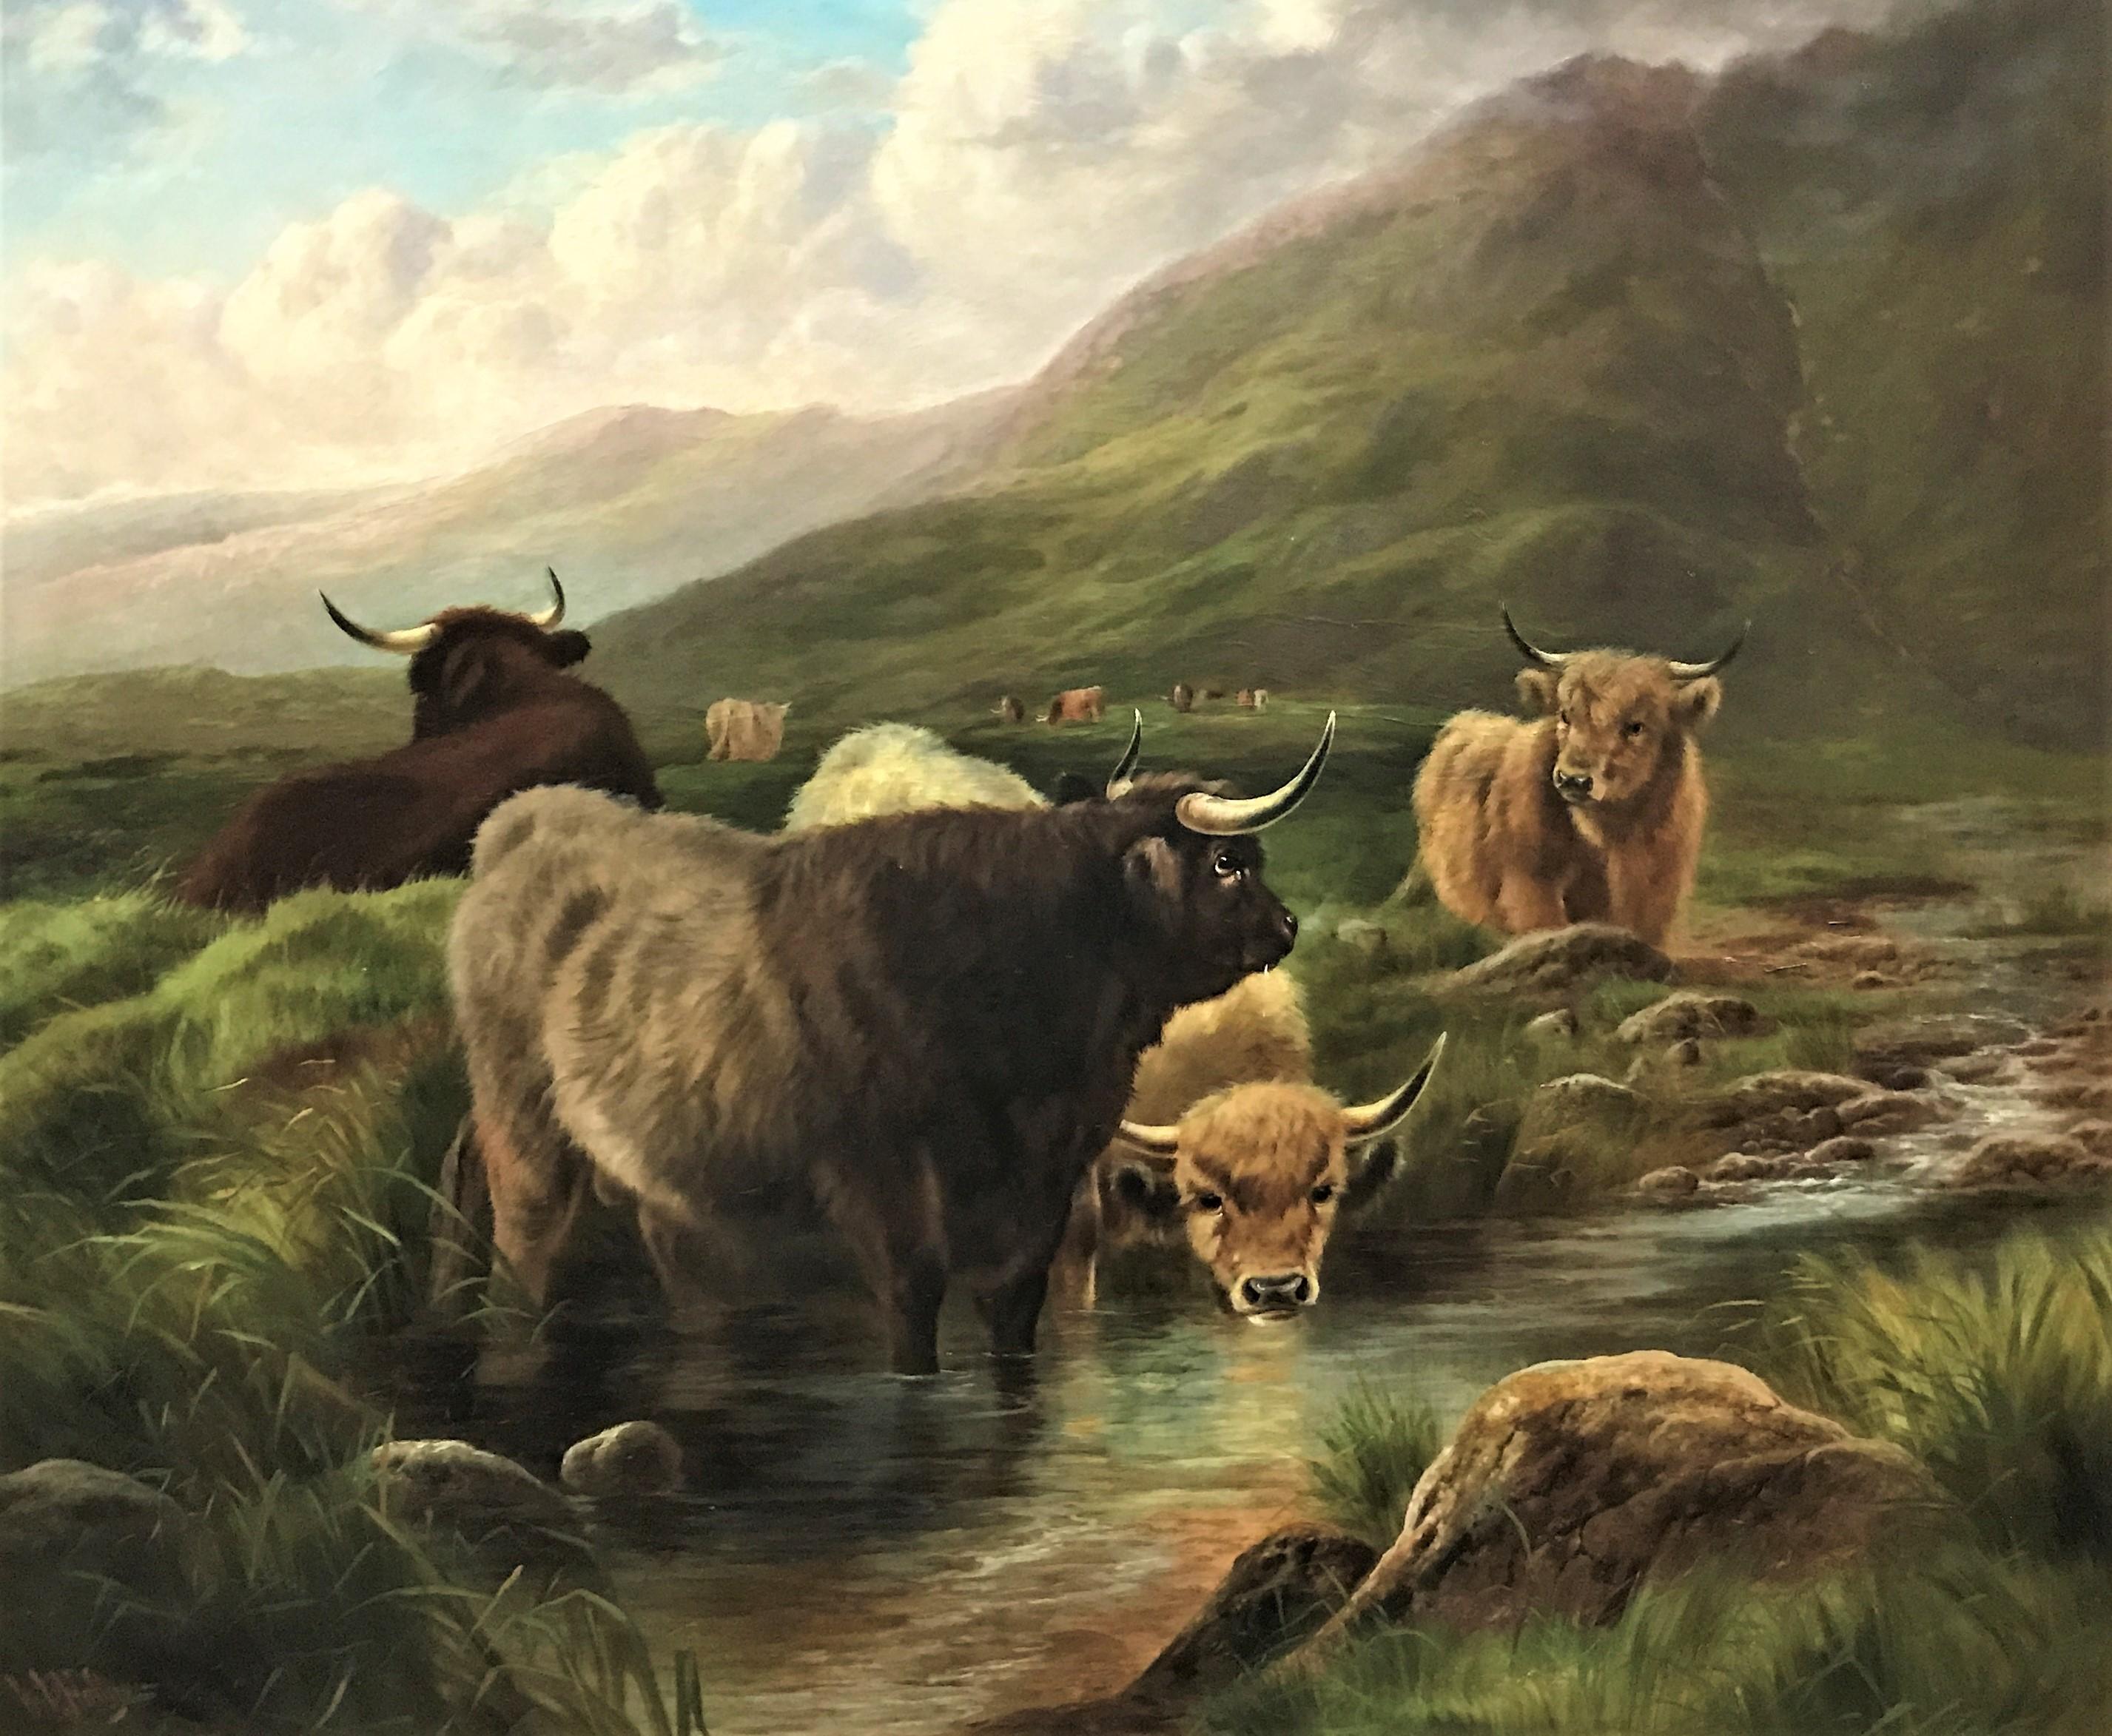 William Perring Hollyer Animal Painting - Highland Cattle in a Mountain Glen, original oil on canvas, 19thC British